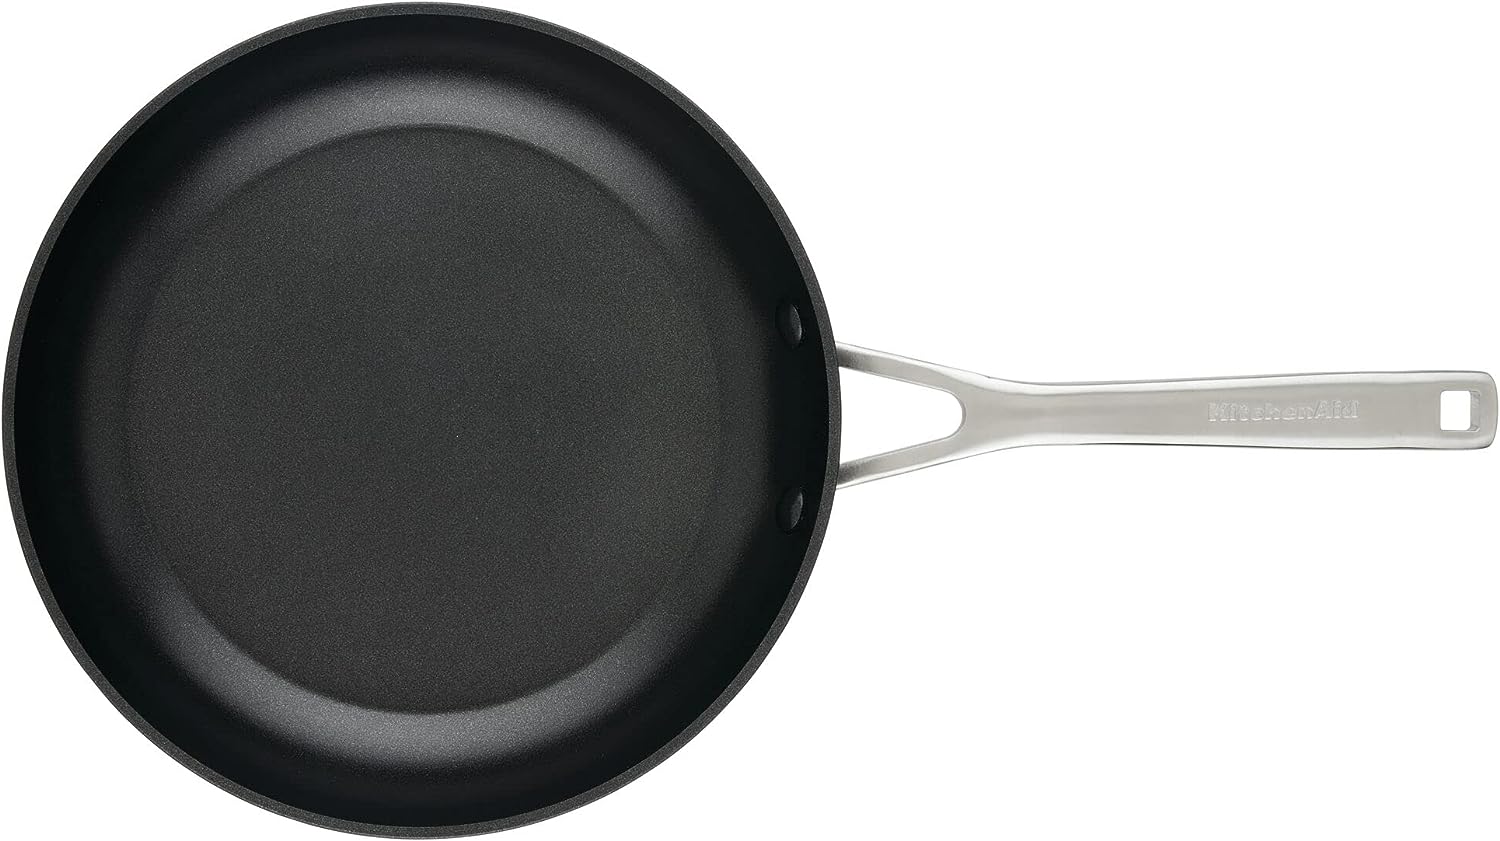 Kitchenaid Hard-Anodized Induction Nonstick Frying Pan, 8.25-Inch